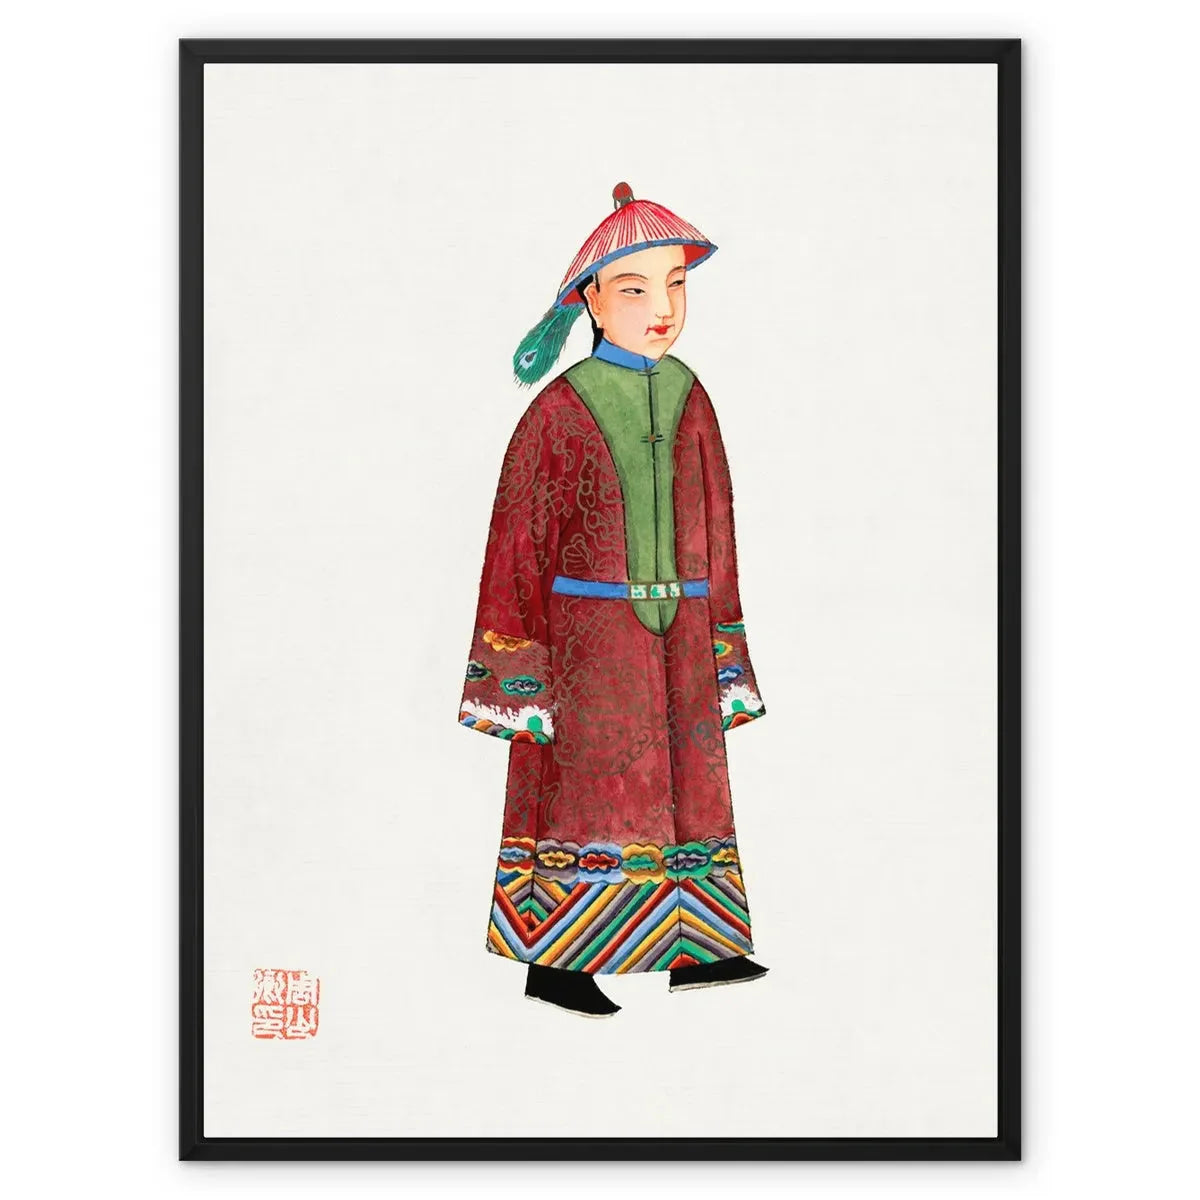 Chinese Dandy Framed Canvas - 24’x32’ / Black Frame / White Wrap - Posters Prints & Visual Artwork - Aesthetic Art